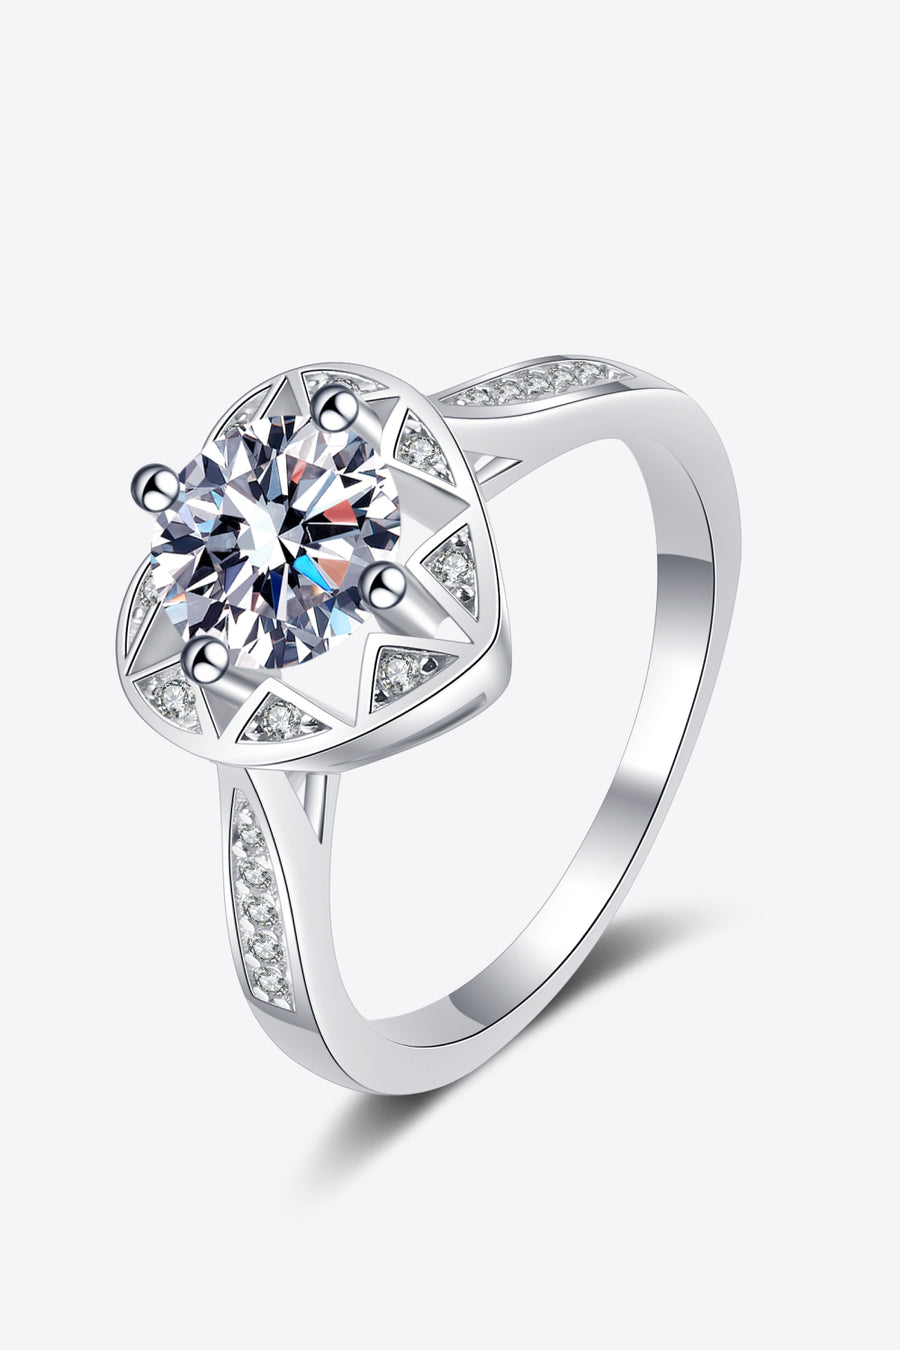 Moissanite, Heart Ring, Jewelry, Fashion, Accessories, Style, Romantic, Statement Piece